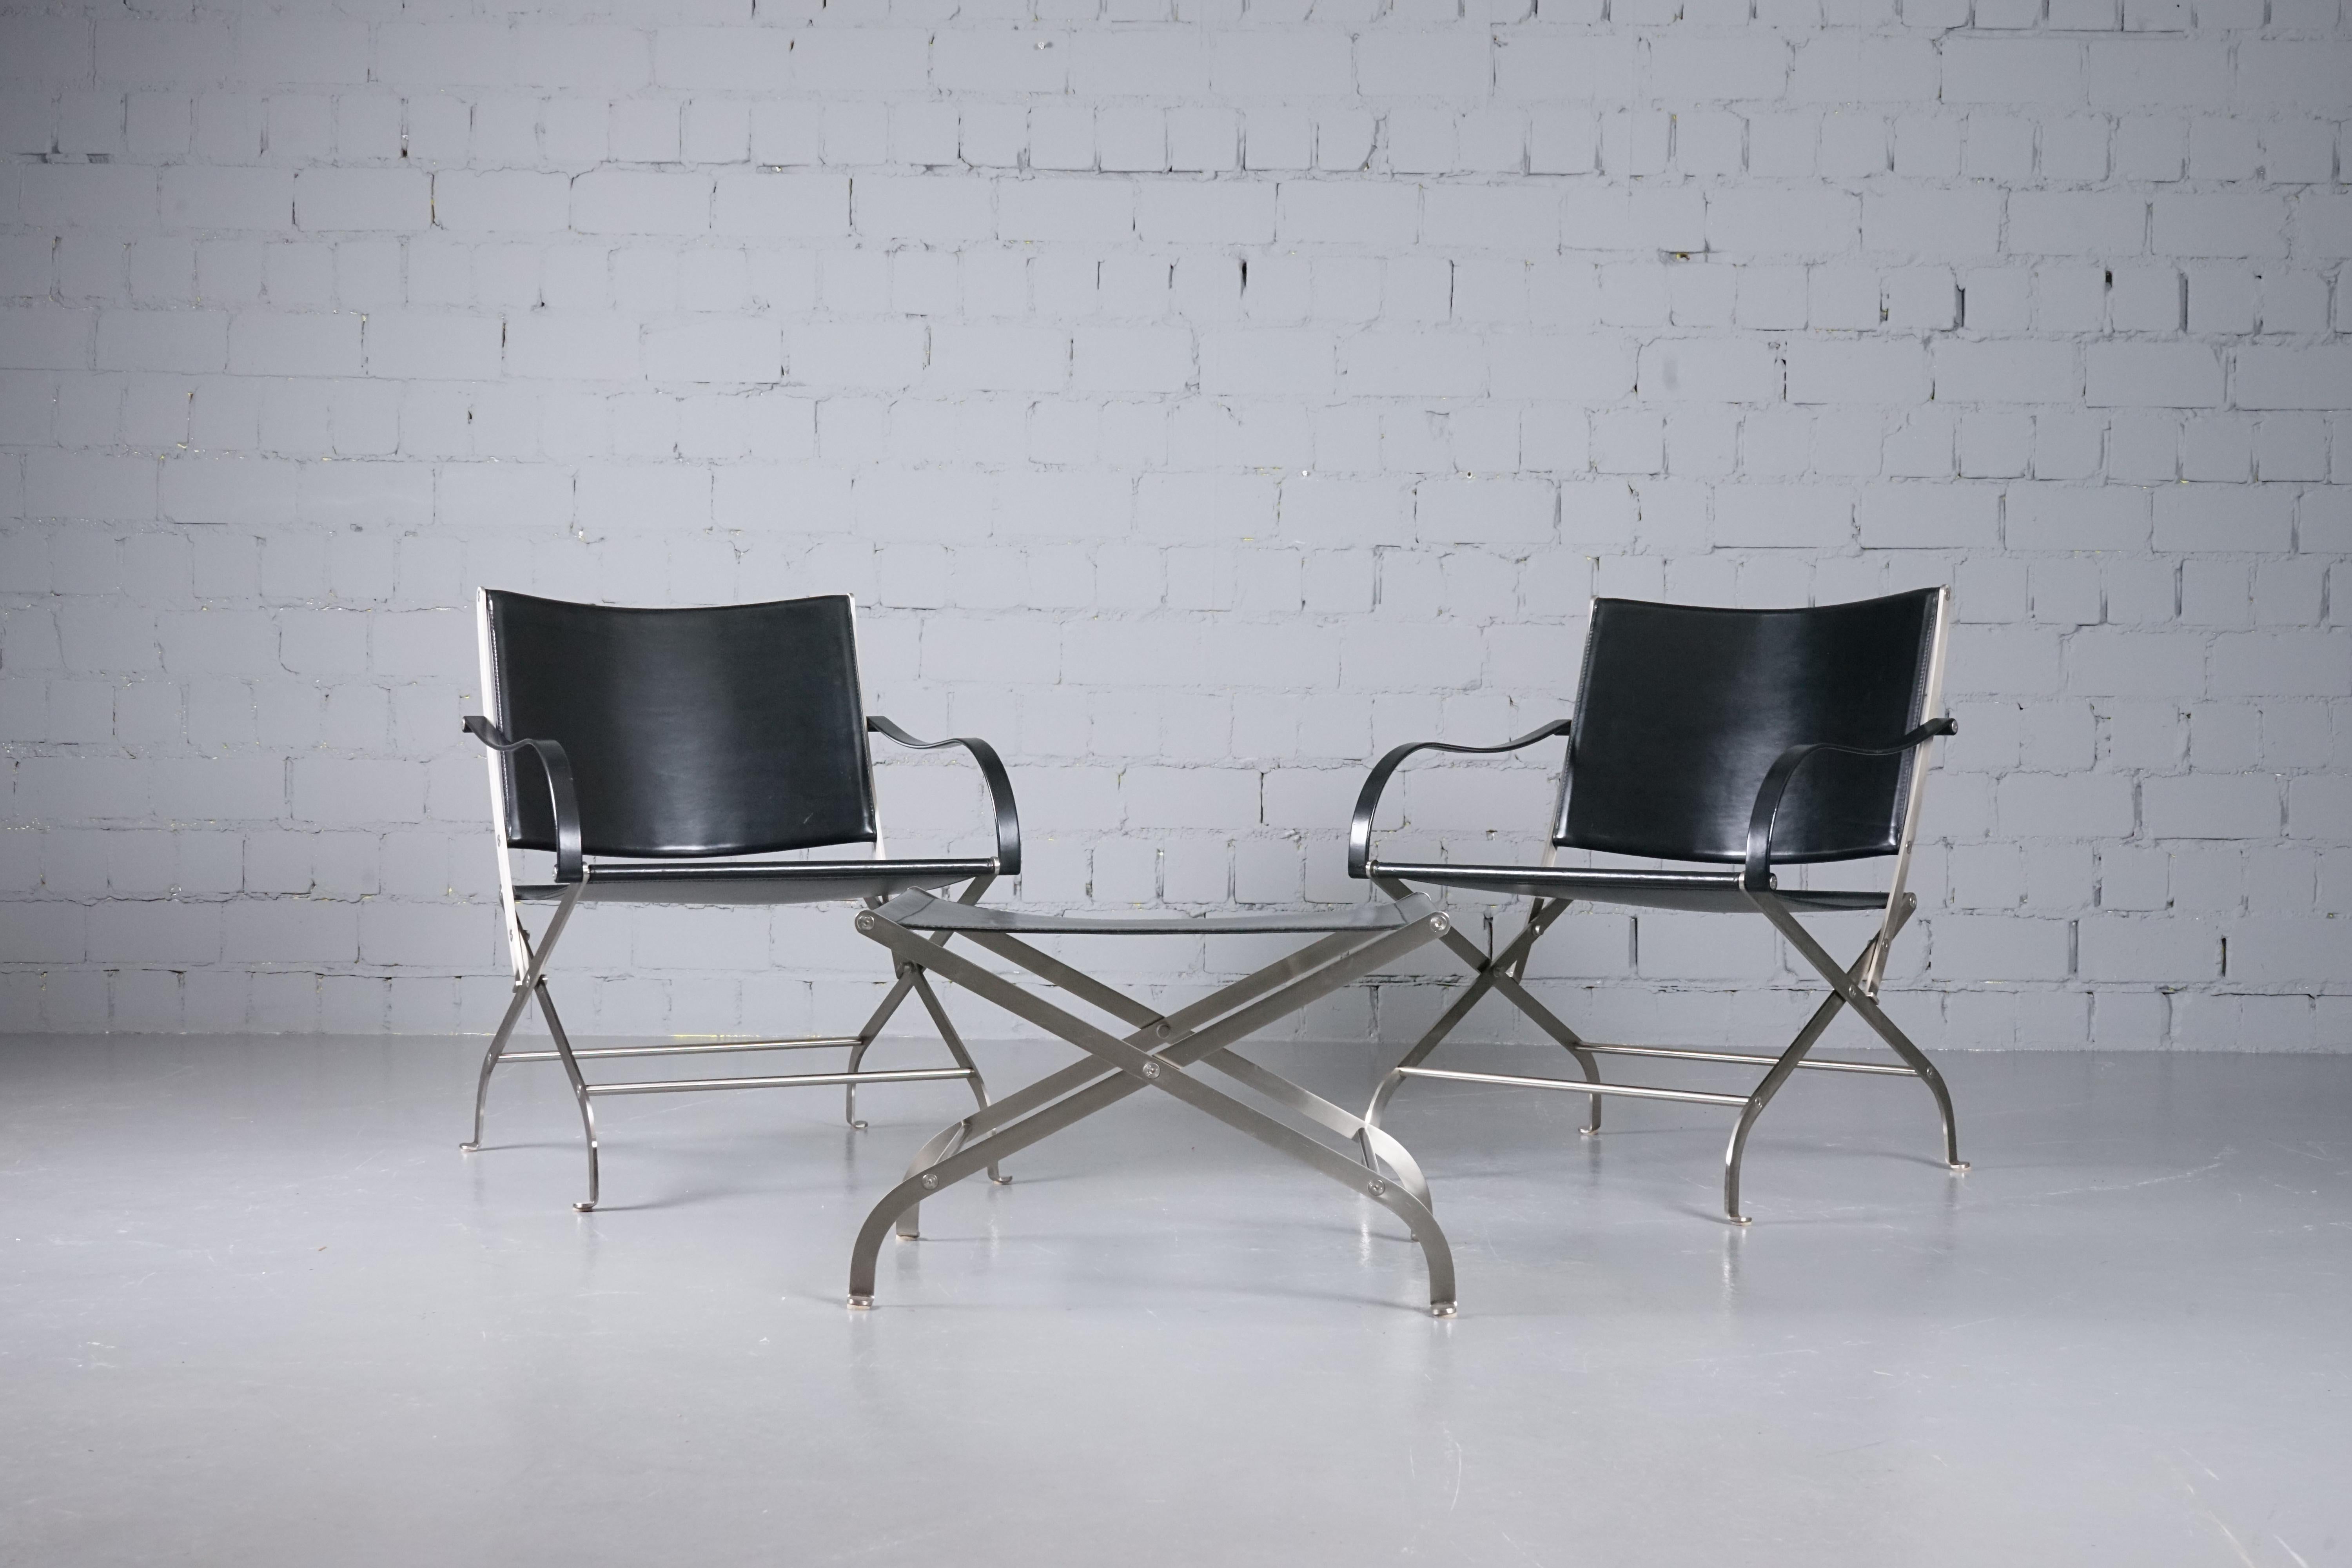 Two arm chairs / folding chairs and one stool. Modell Carlotta by Antonio Citterio for Flexform, designed in 1996. Made in black leather and steel. 